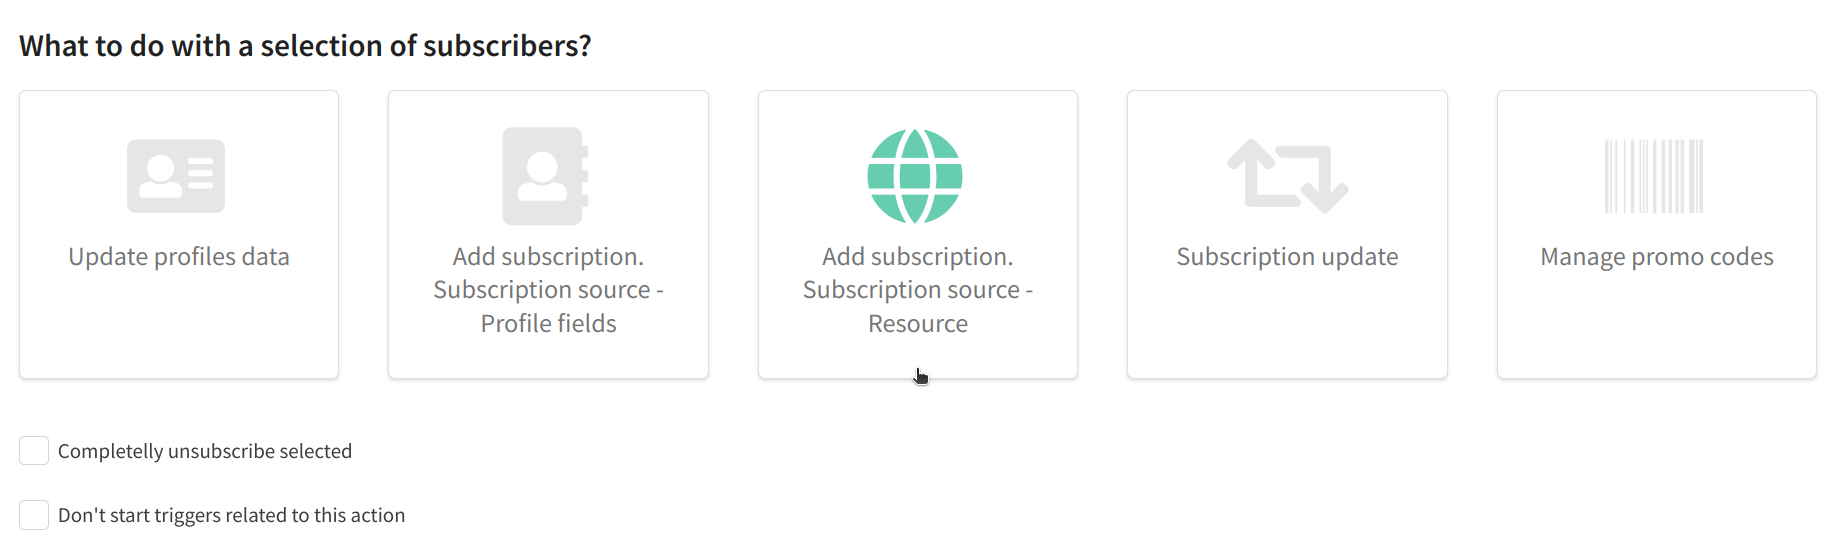 Subscription source - resource